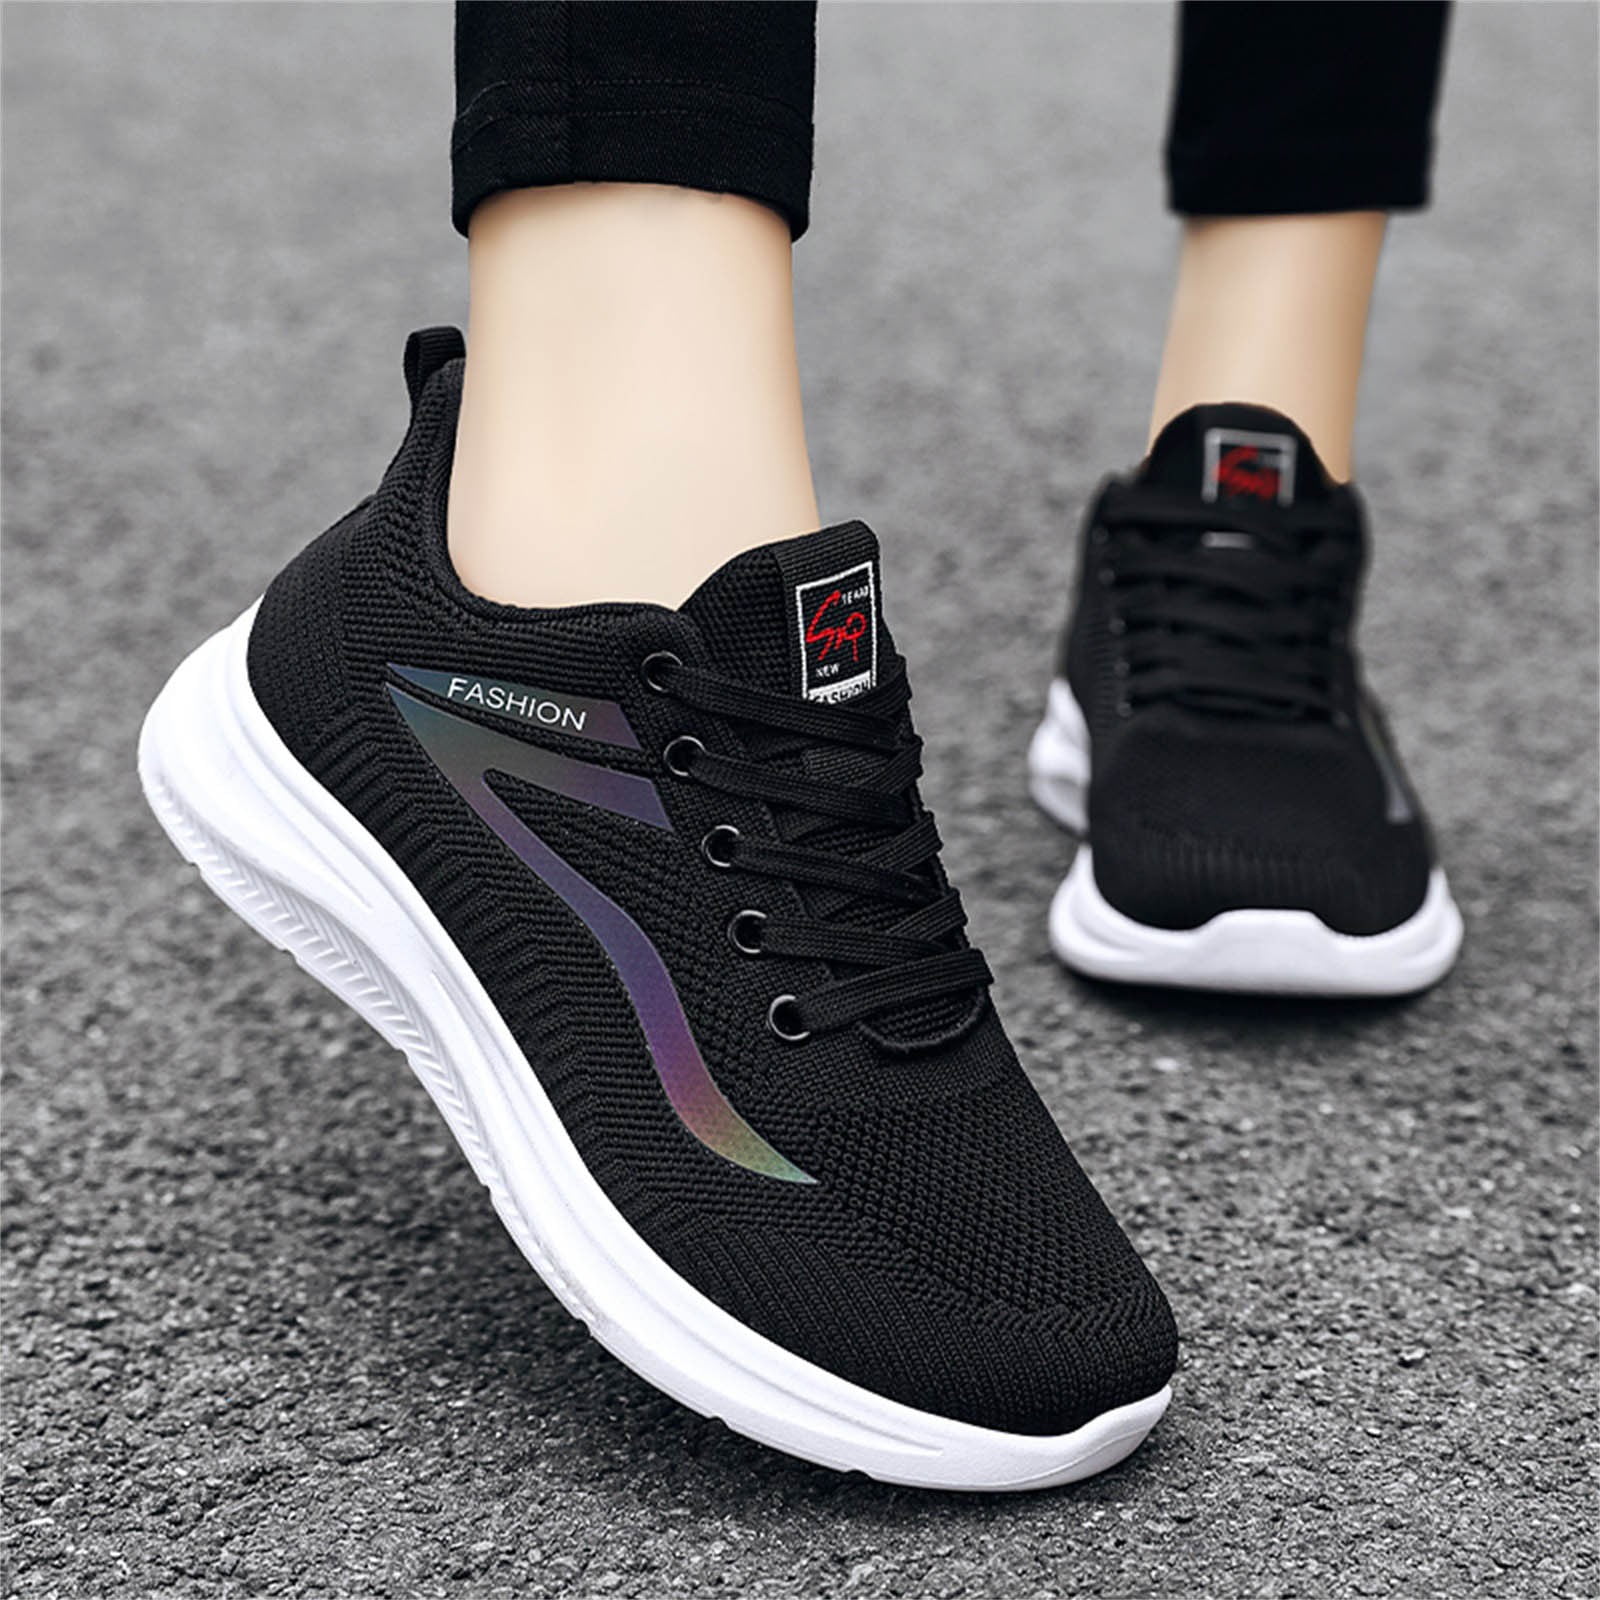 Fashion Autumn Women's Sneakers Flat Lightweight Round Toe Lace Up Mesh Breathable Simple Style Winter Hiking Sneakers Women Animal Print Sneakers for Women Lace up Rhinestone Sneakers Women Flat - Walmart.com